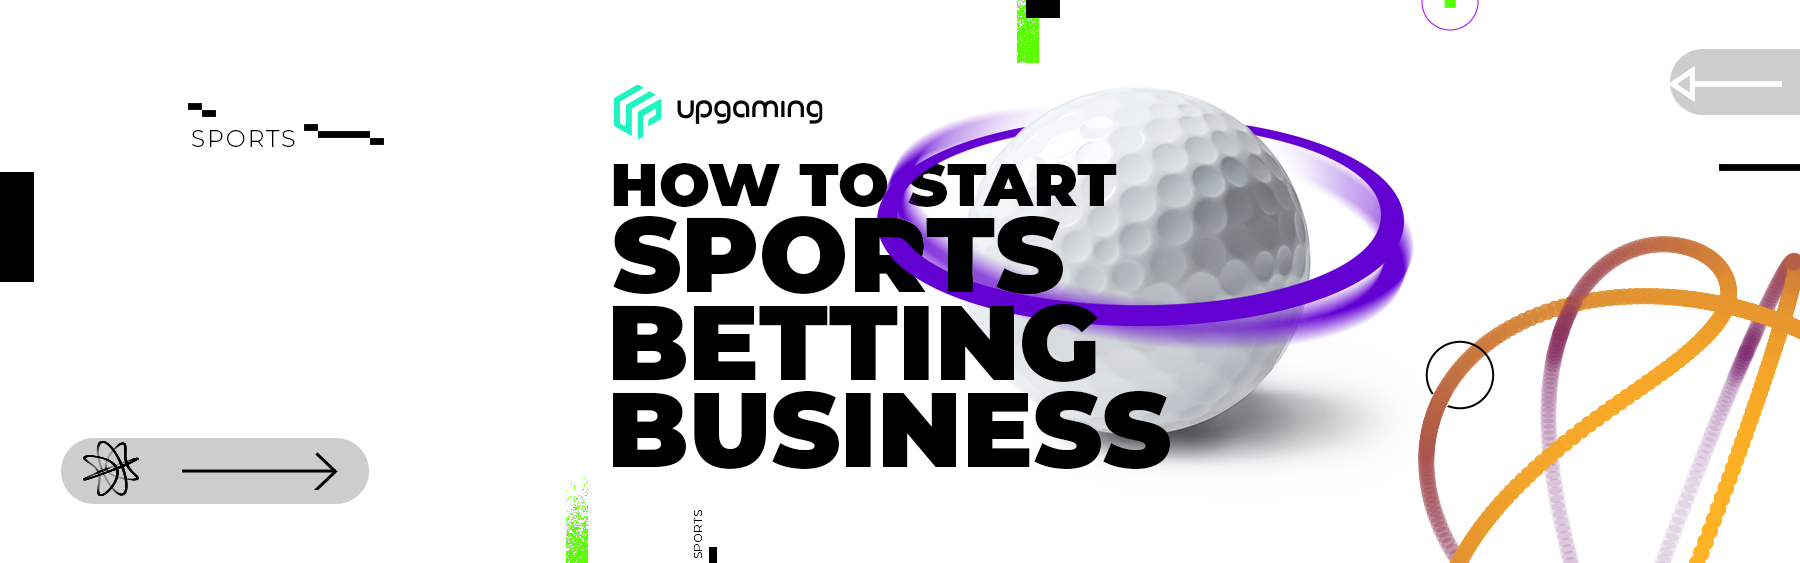 Photo: how to get started in sports betting